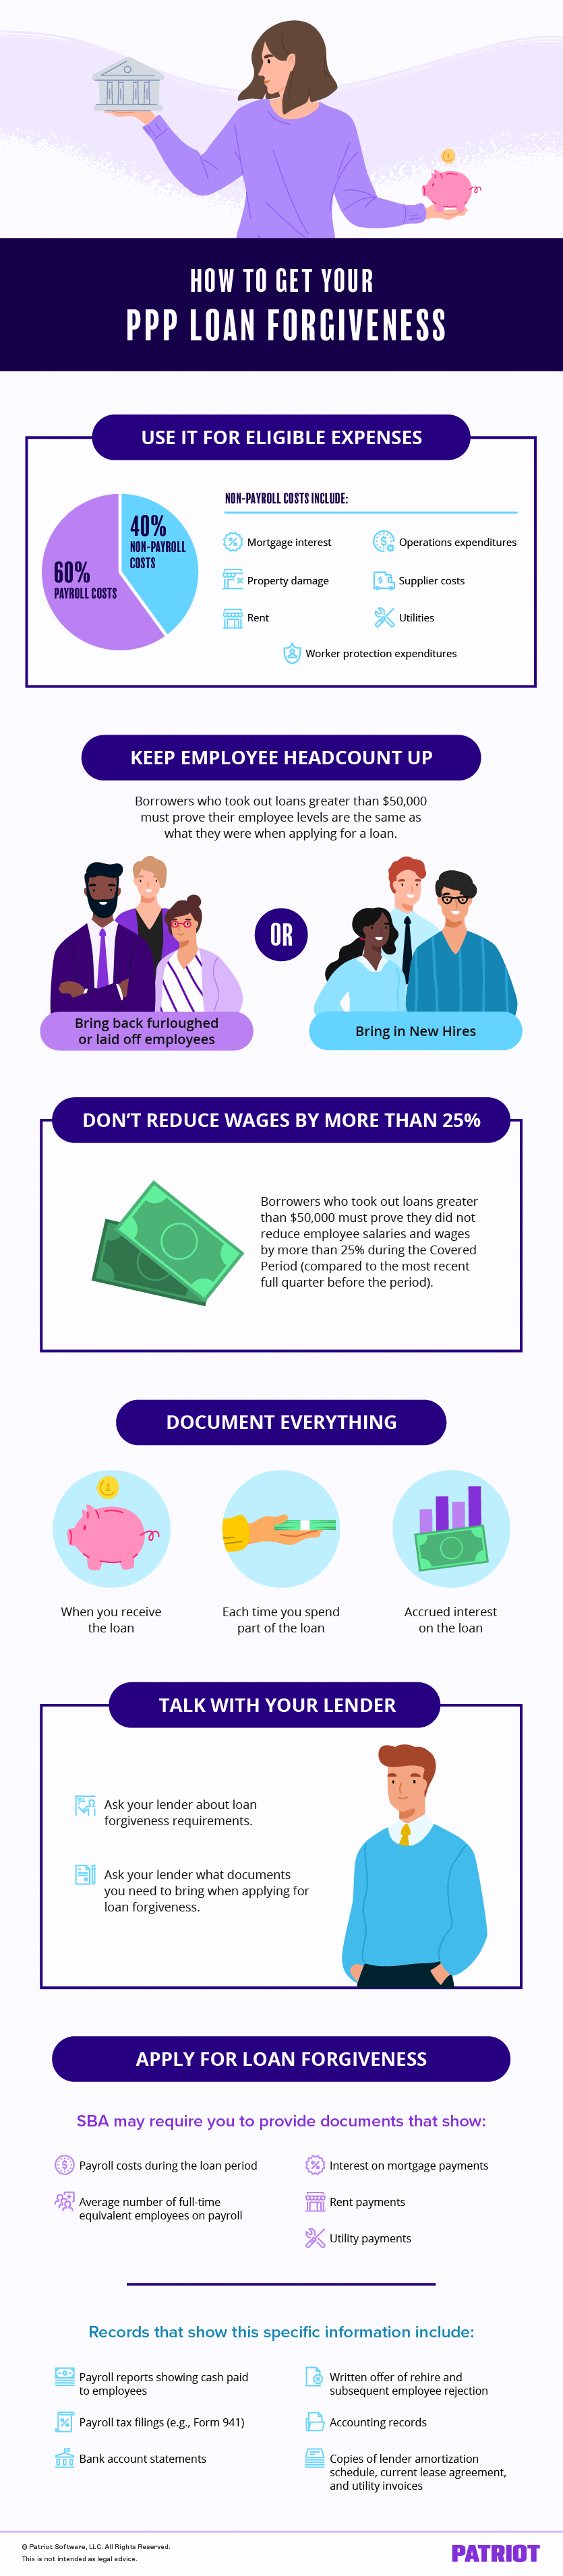 PPP loan forgiveness infographic detailing qualifying expenses, documents, and more